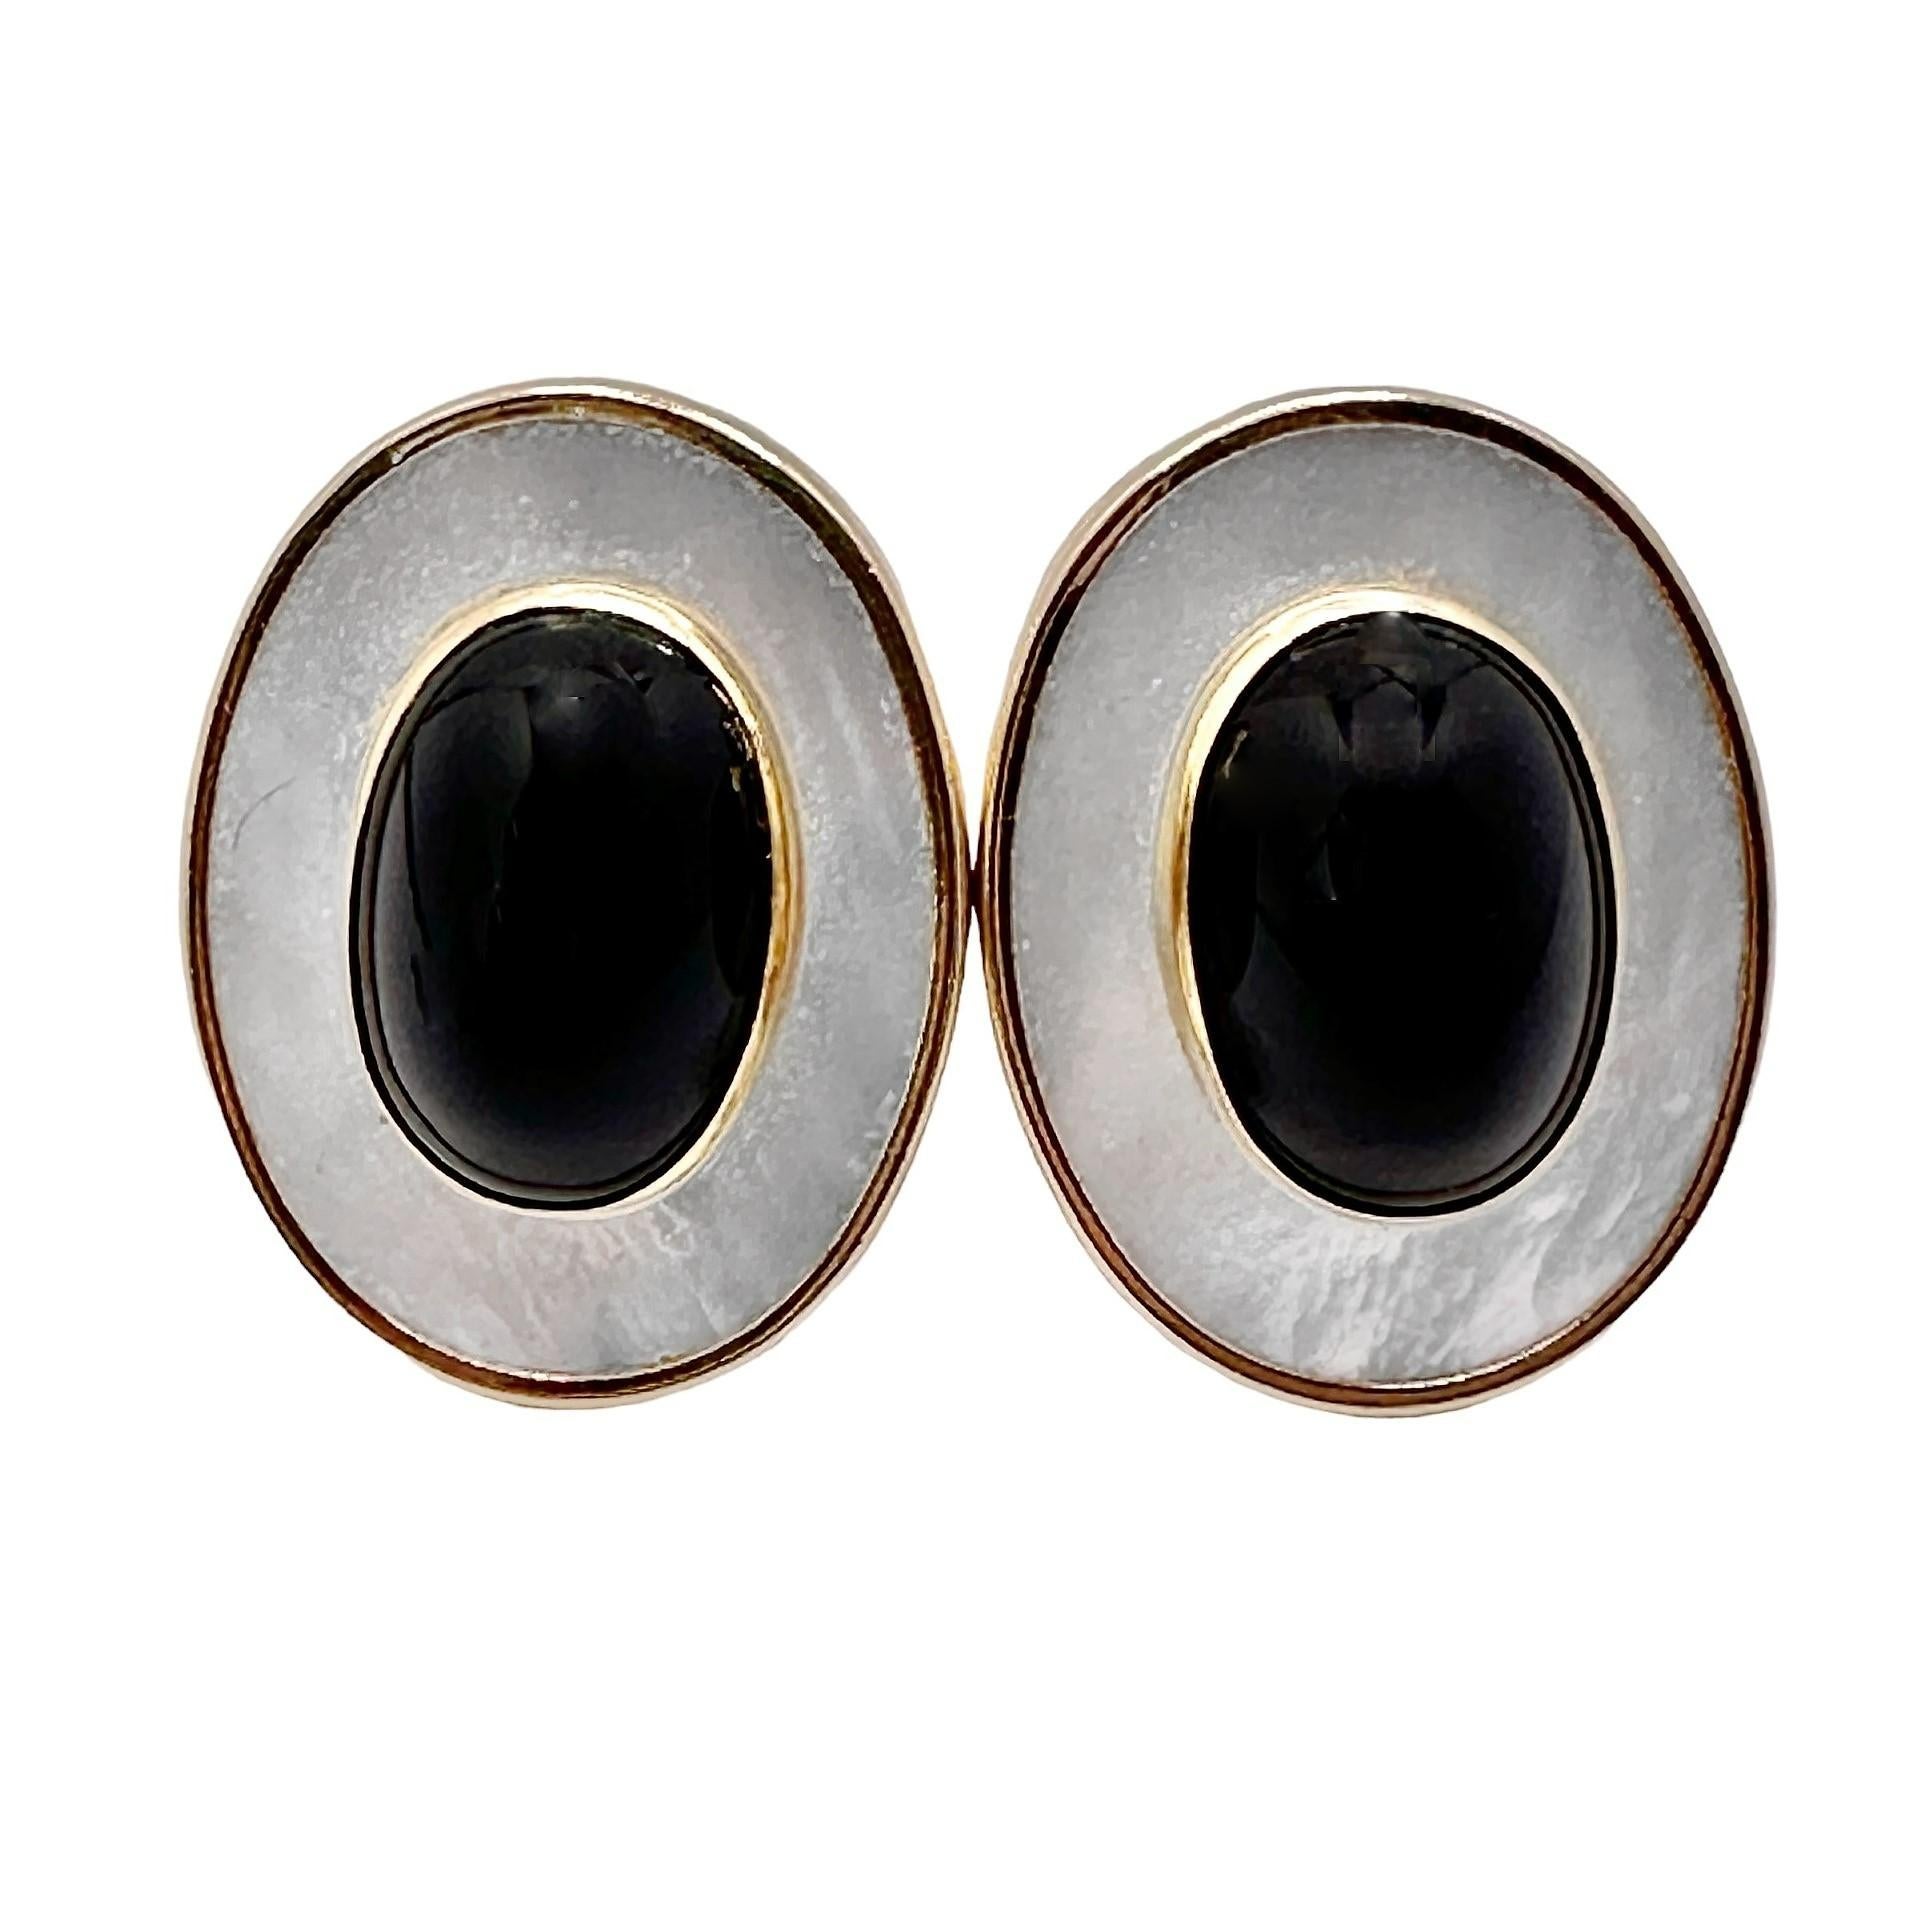 This pair of very aesthetic and soundly constructed 14K yellow gold clip on earrings are truly captivating, with two onyx cabochons set in bezels on a background of vibrant mother of pearl. They are lightweight and comfortable to wear. Earrings